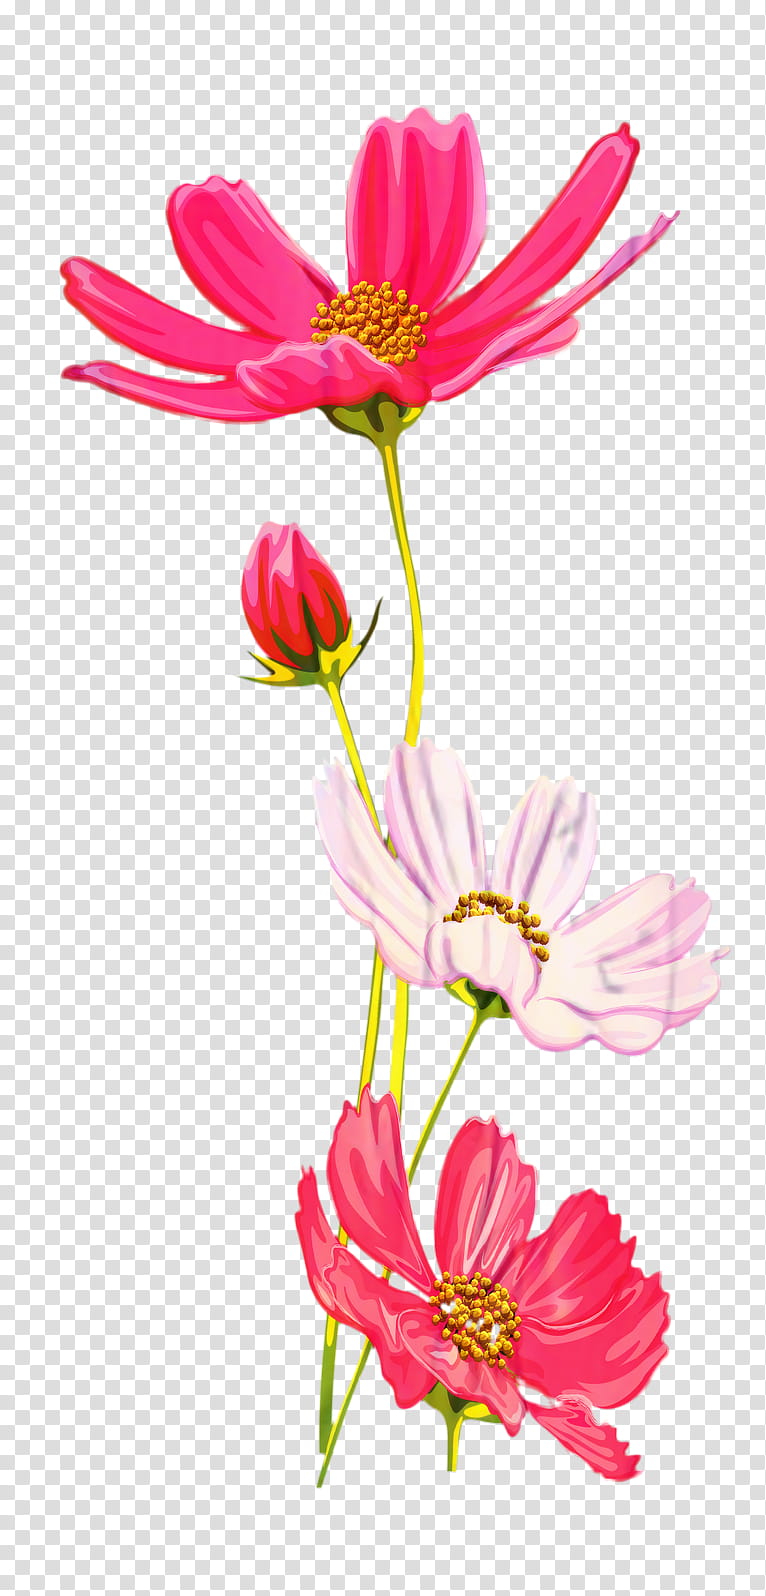 Drawing Of Family, Garden Cosmos, Flower, Cut Flowers, Chrysanthemum, Sulfur Cosmos, Floral Design, Plants transparent background PNG clipart